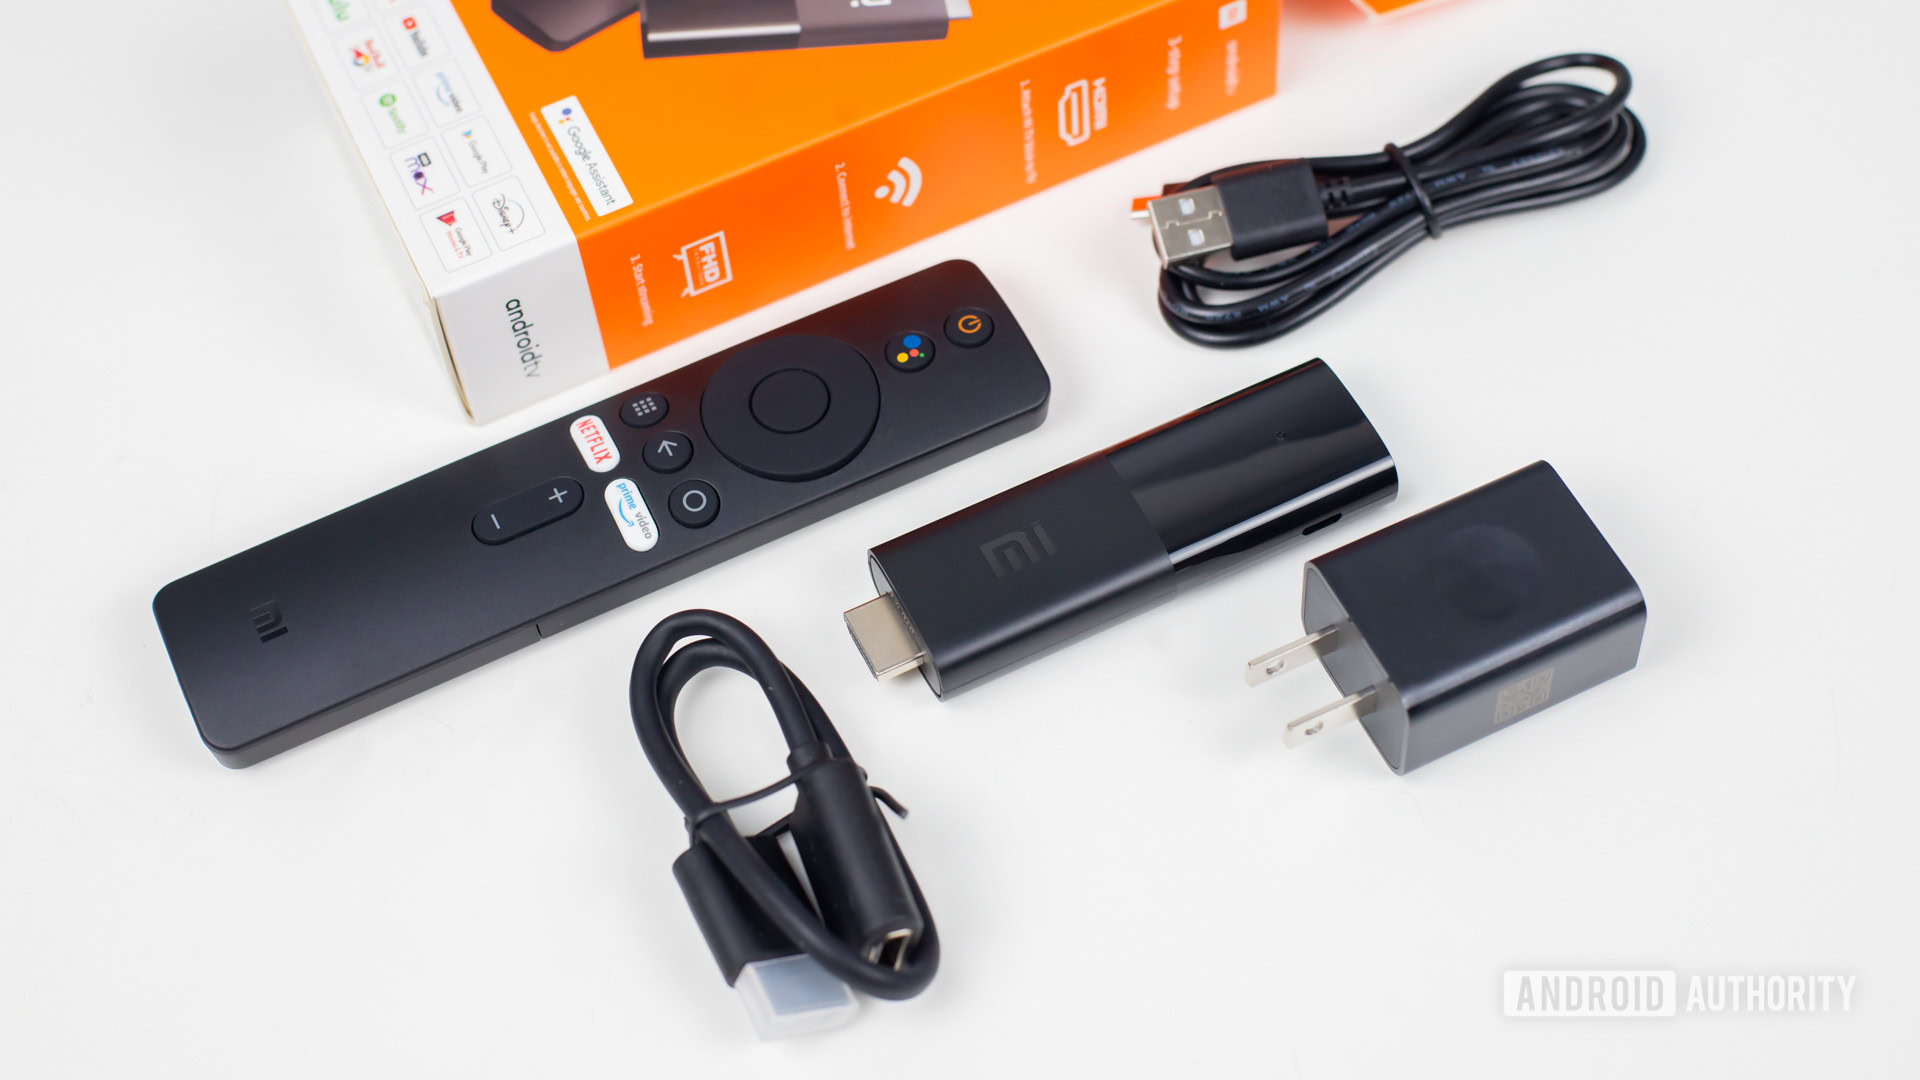 Xiaomi Mi TV Stick Review: You'll fall in love with this TV tweak